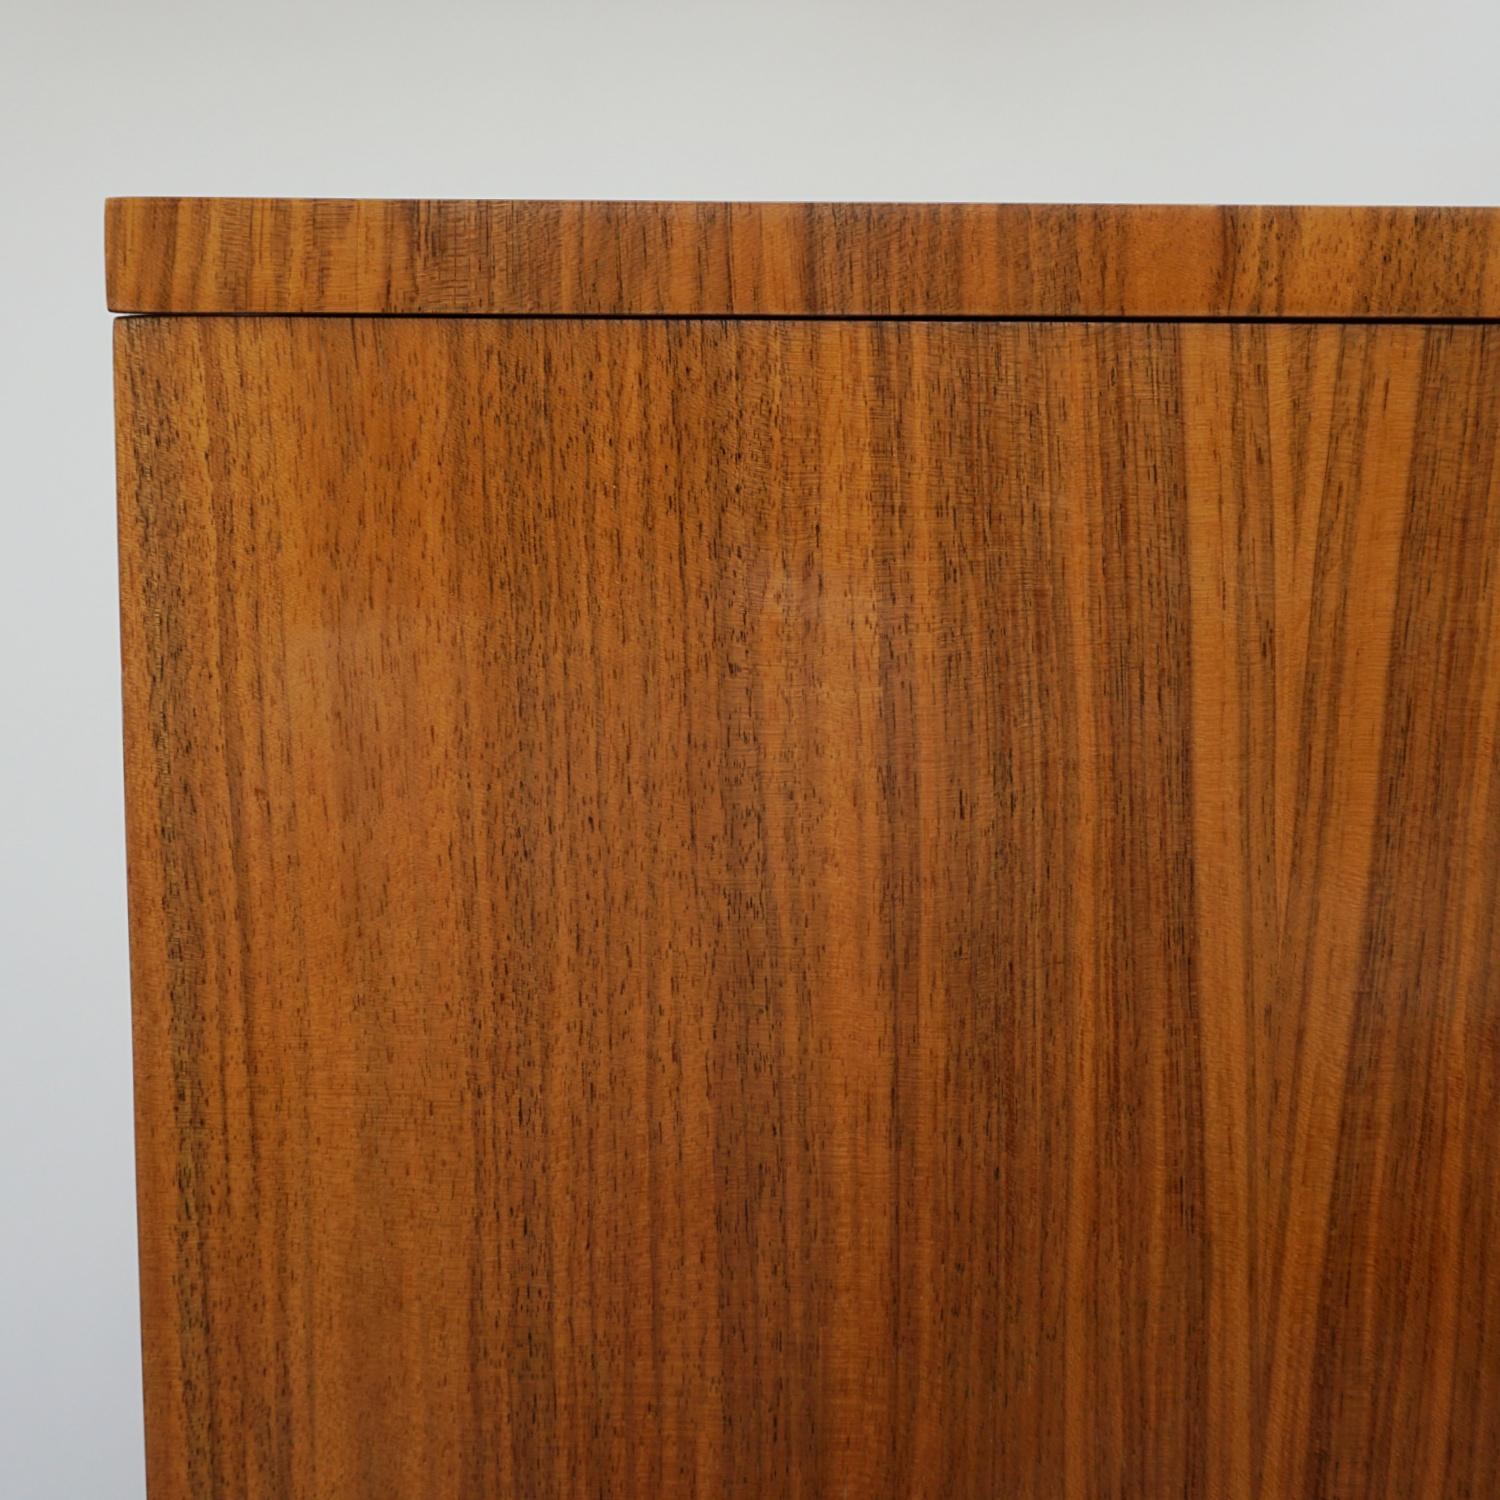 English Art Deco Walnut Cocktail/Drinks Cabinet For Sale